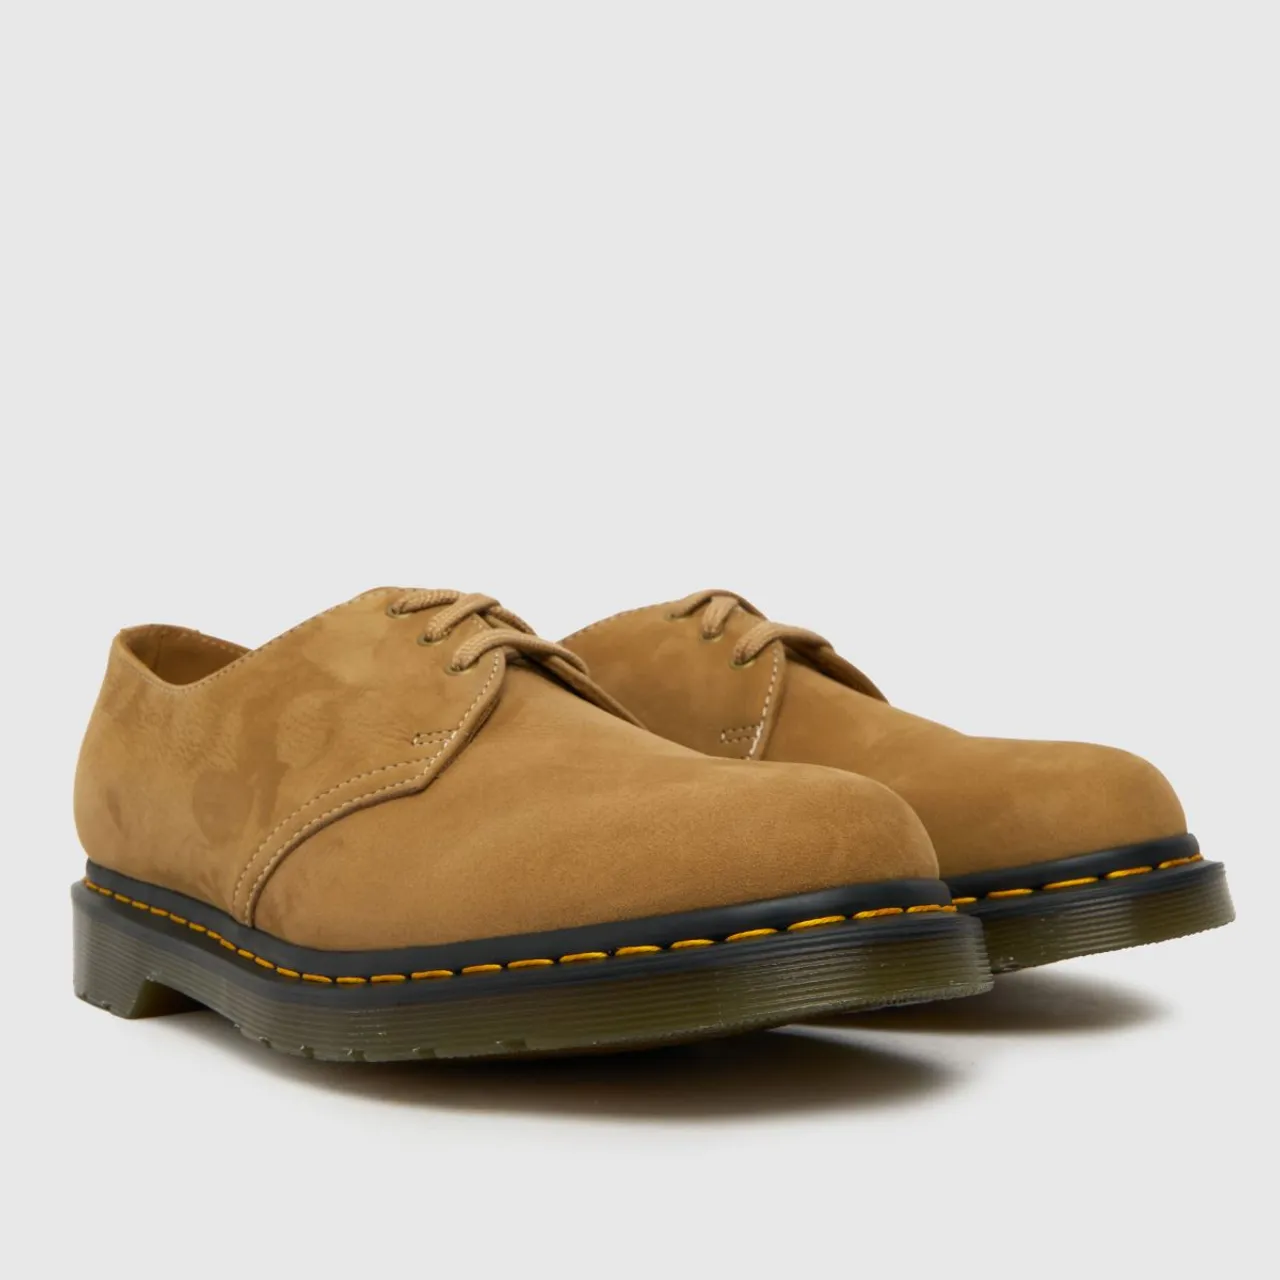 Dr Martens 1461 Shoes In Tan